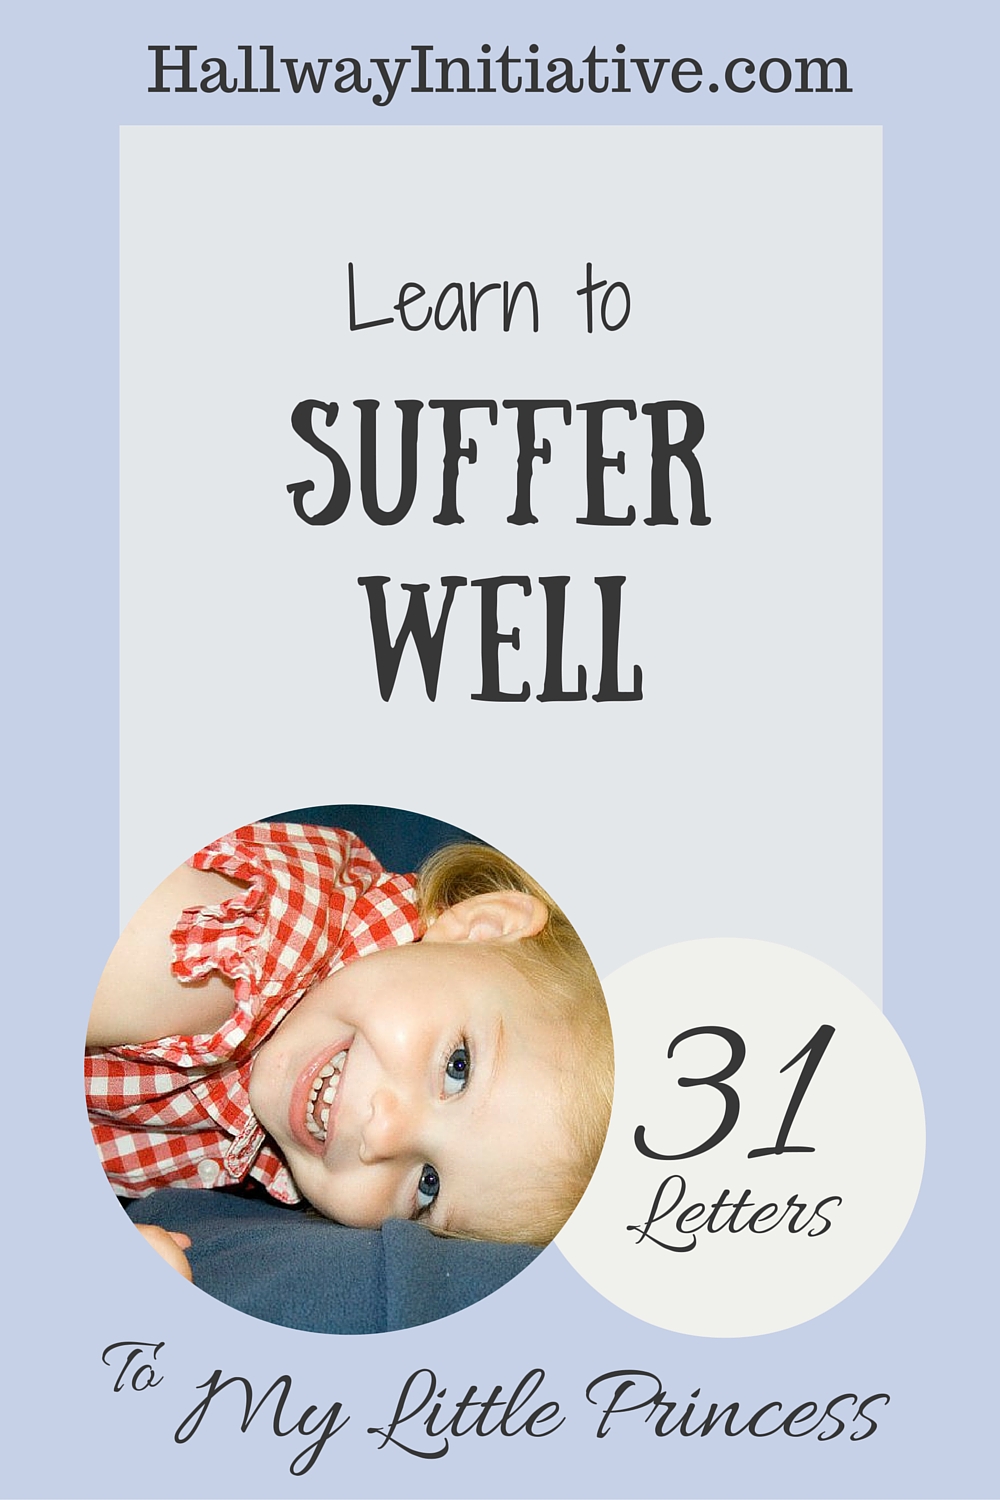 Learn to suffer well